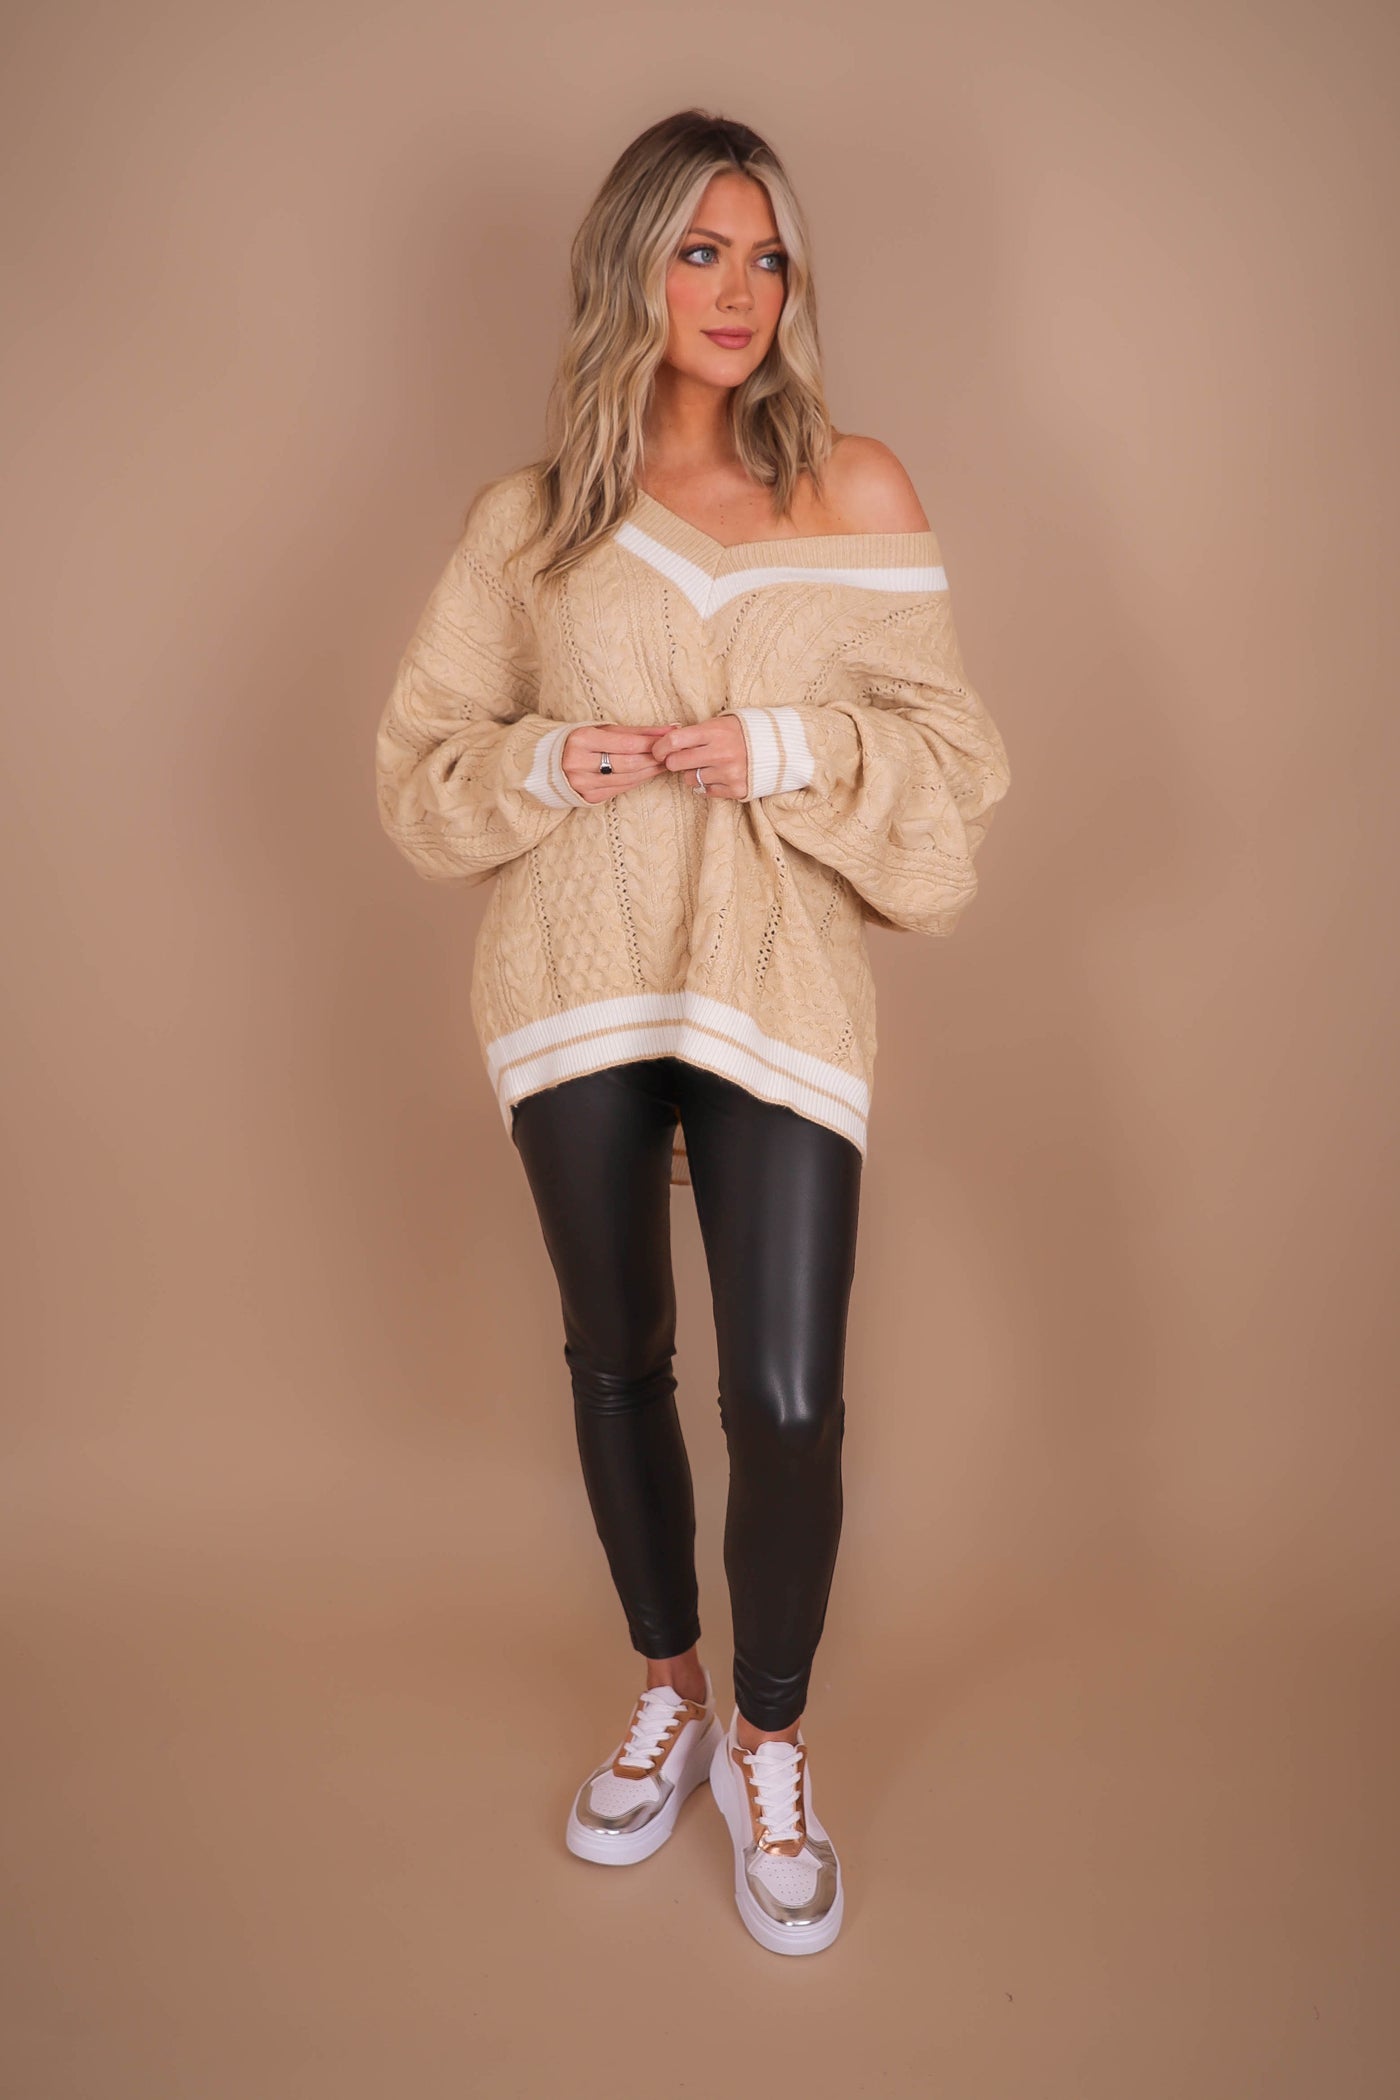 Women's Varsity Knit Sweater- Women's Oversized Knit Sweater- And The Why Sweaters